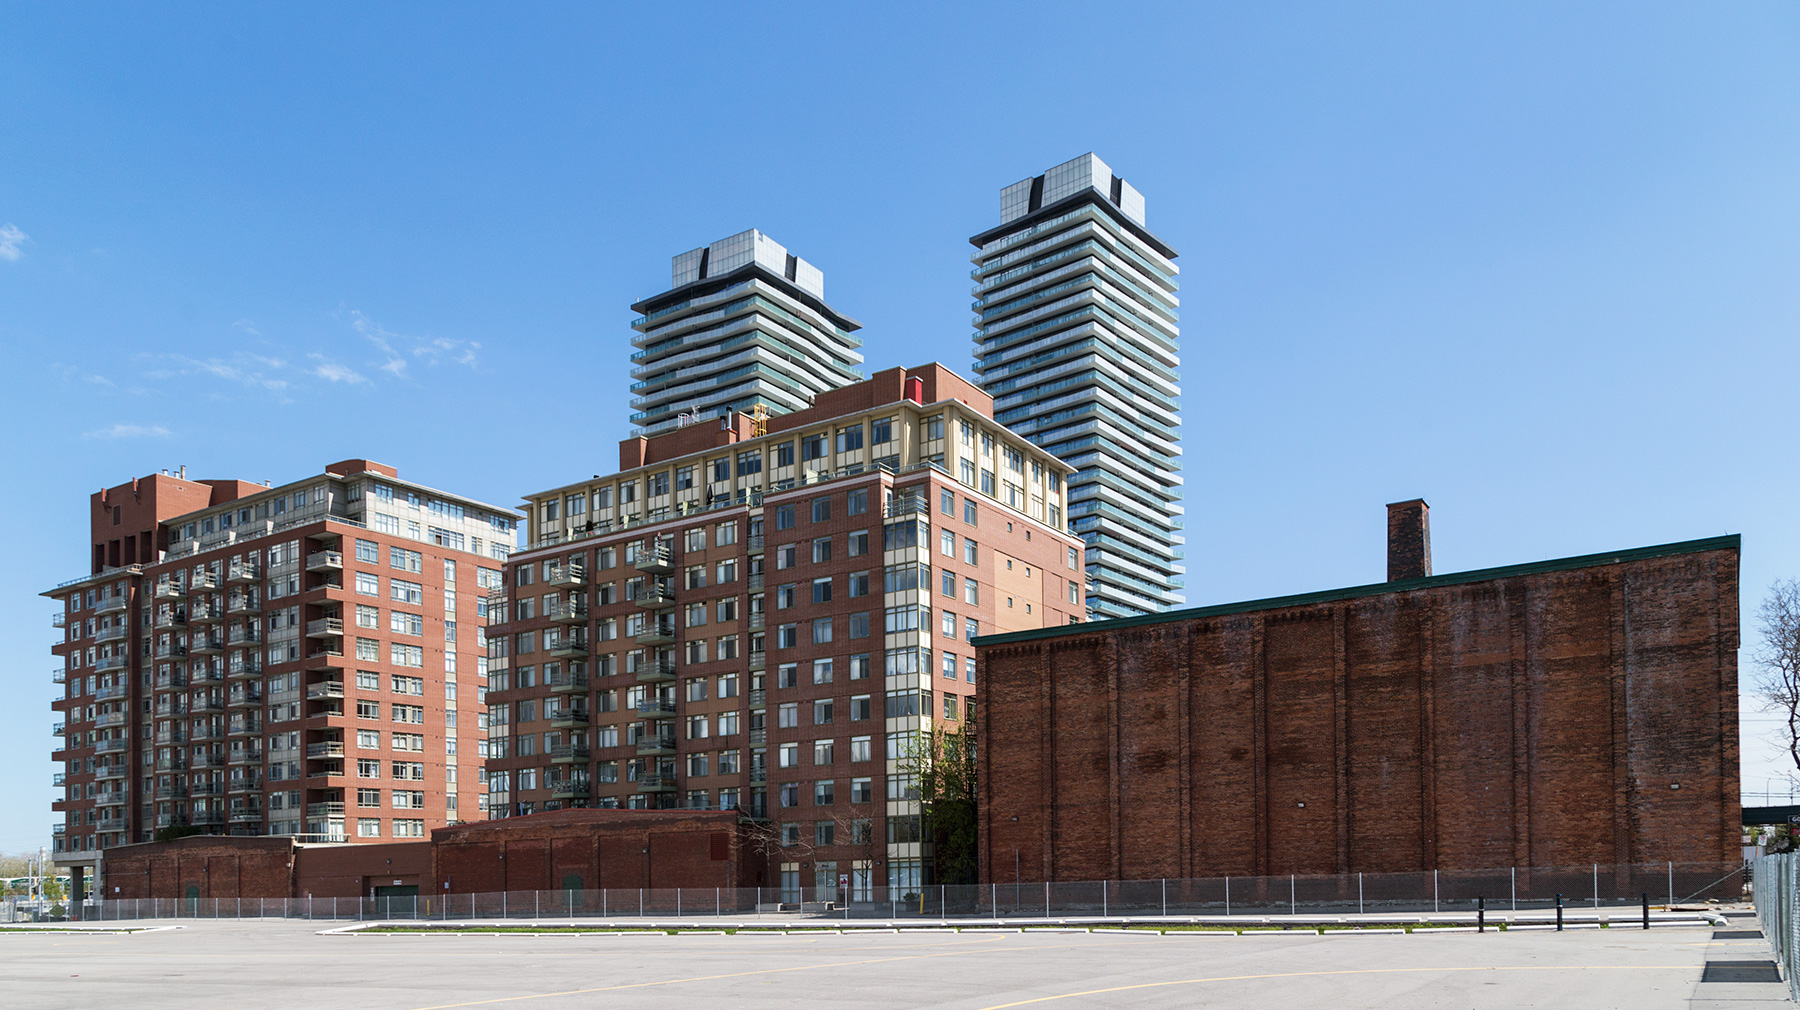 20160519. Toronto's Distillery District provides an example of t